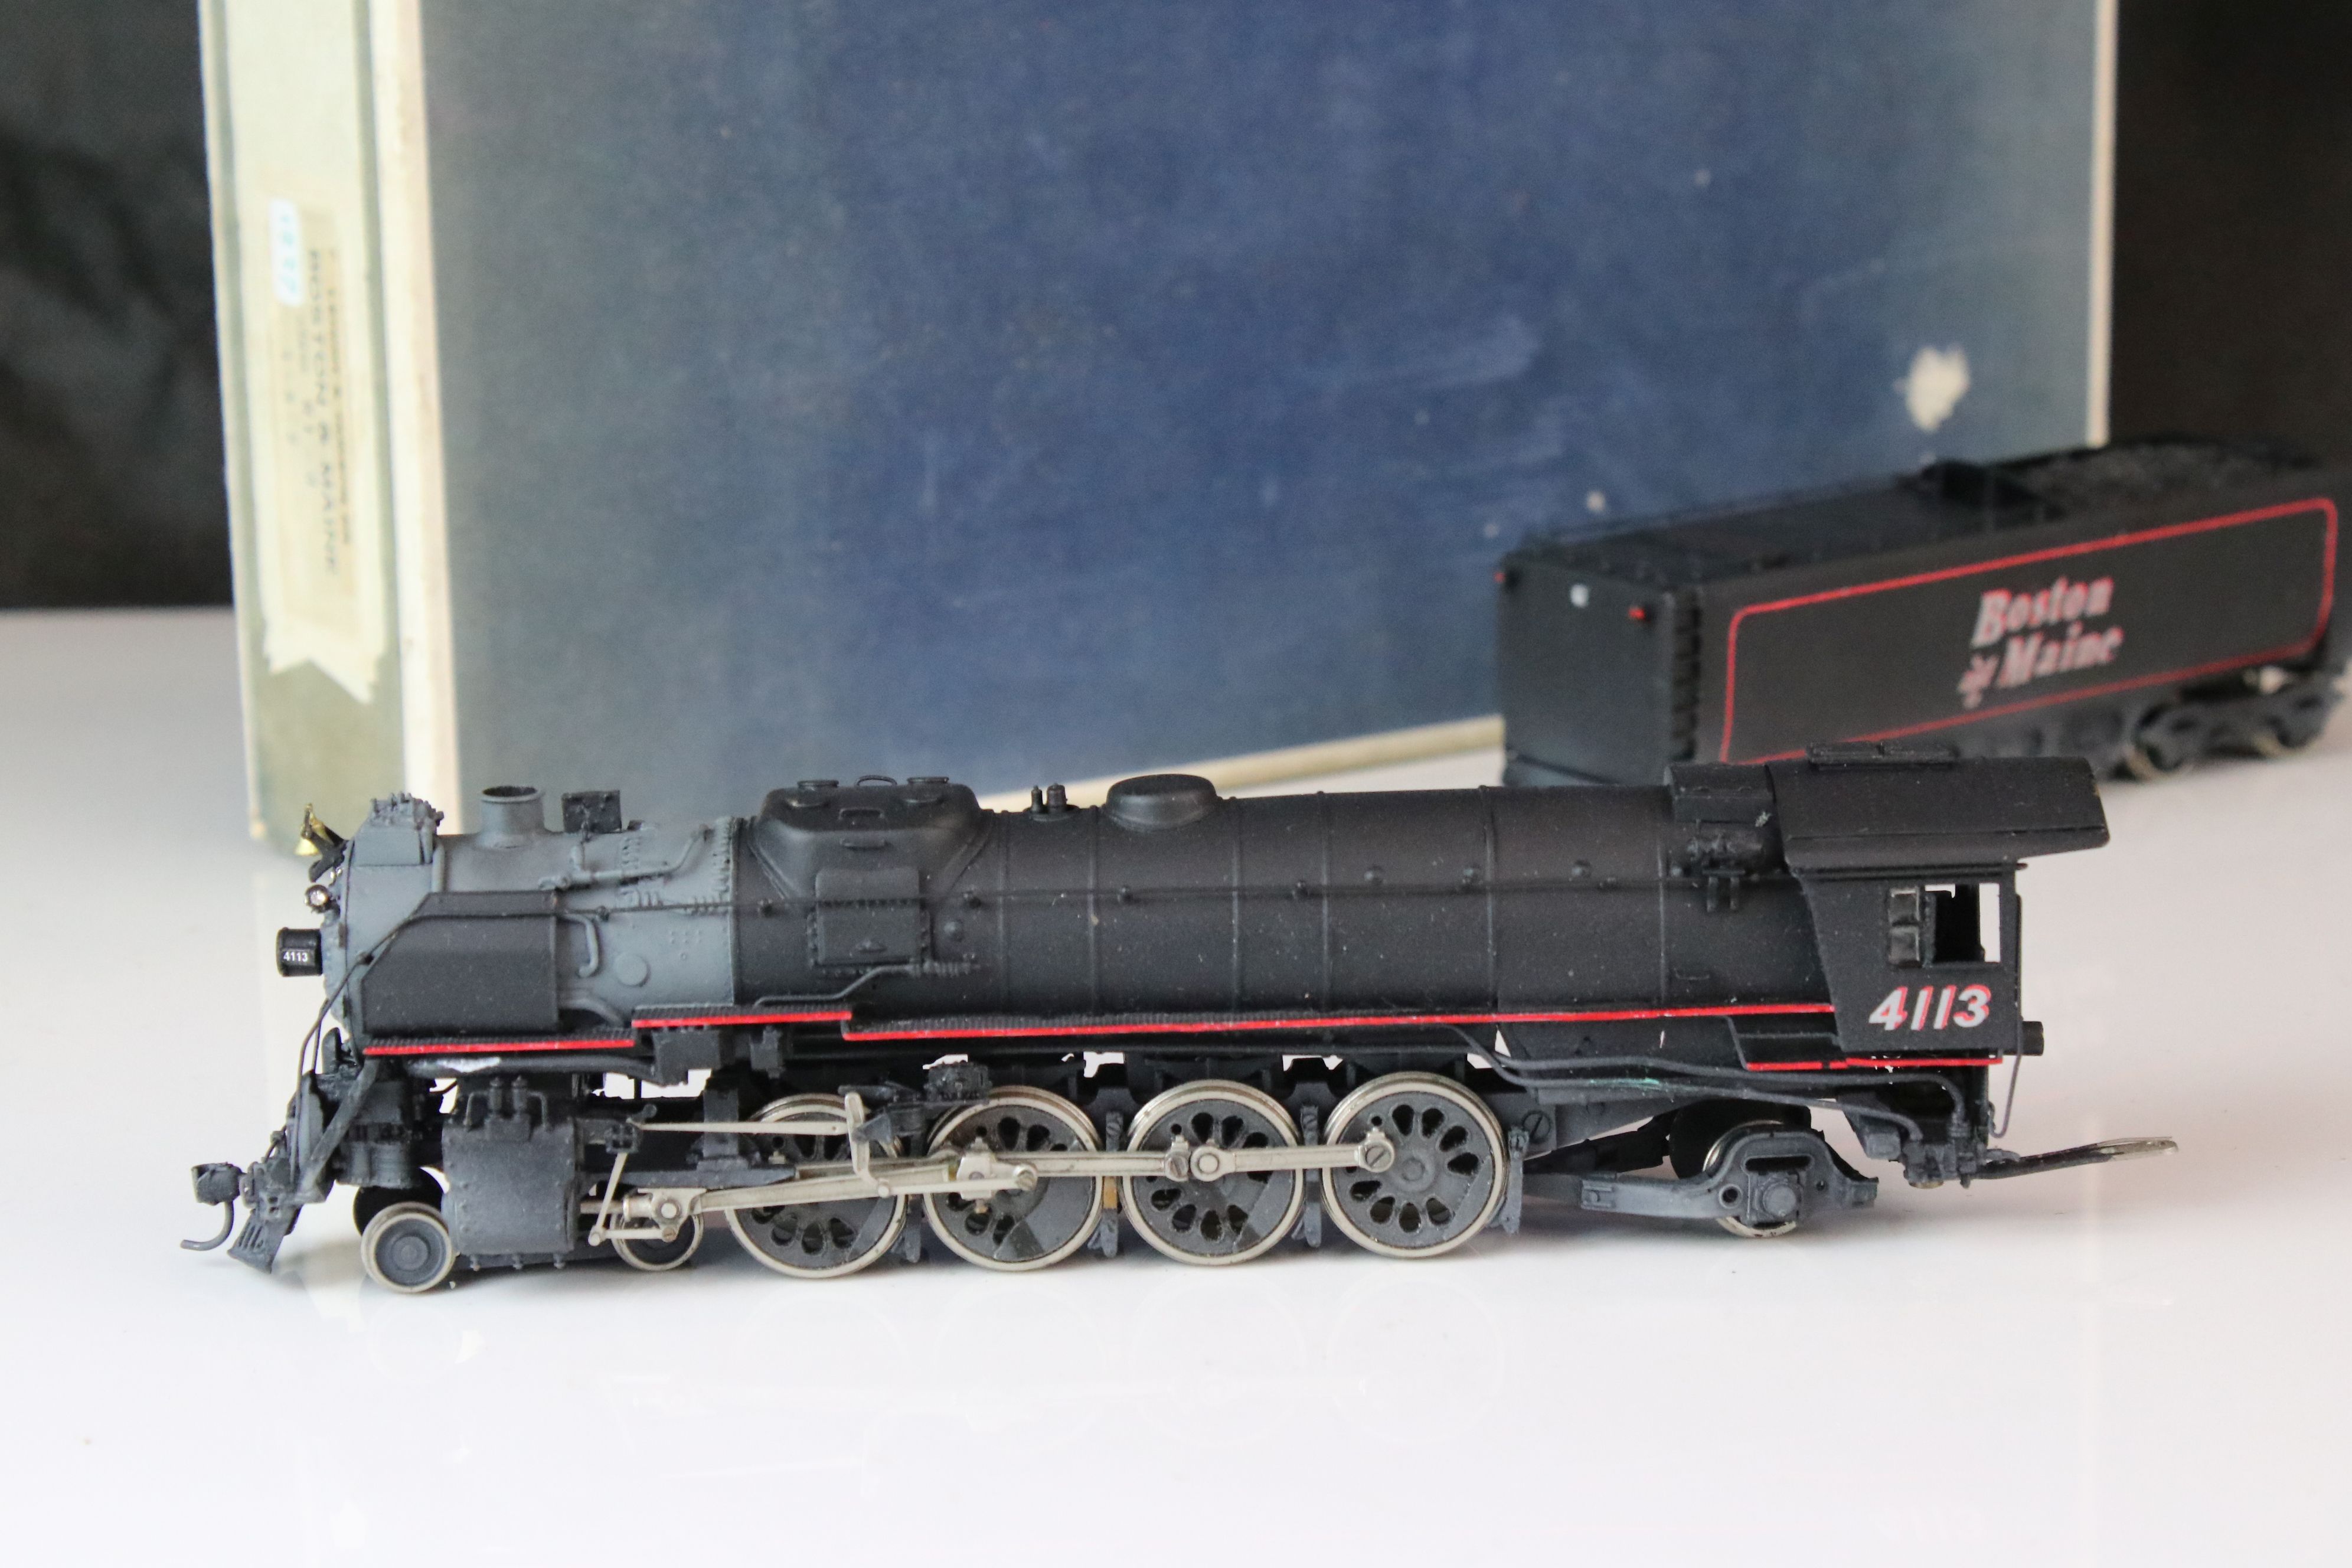 Boxed Olympia HO gauge Boston & Maine Class R1-d 4-8-2 4113 locomotive & tender, painted, - Image 2 of 14